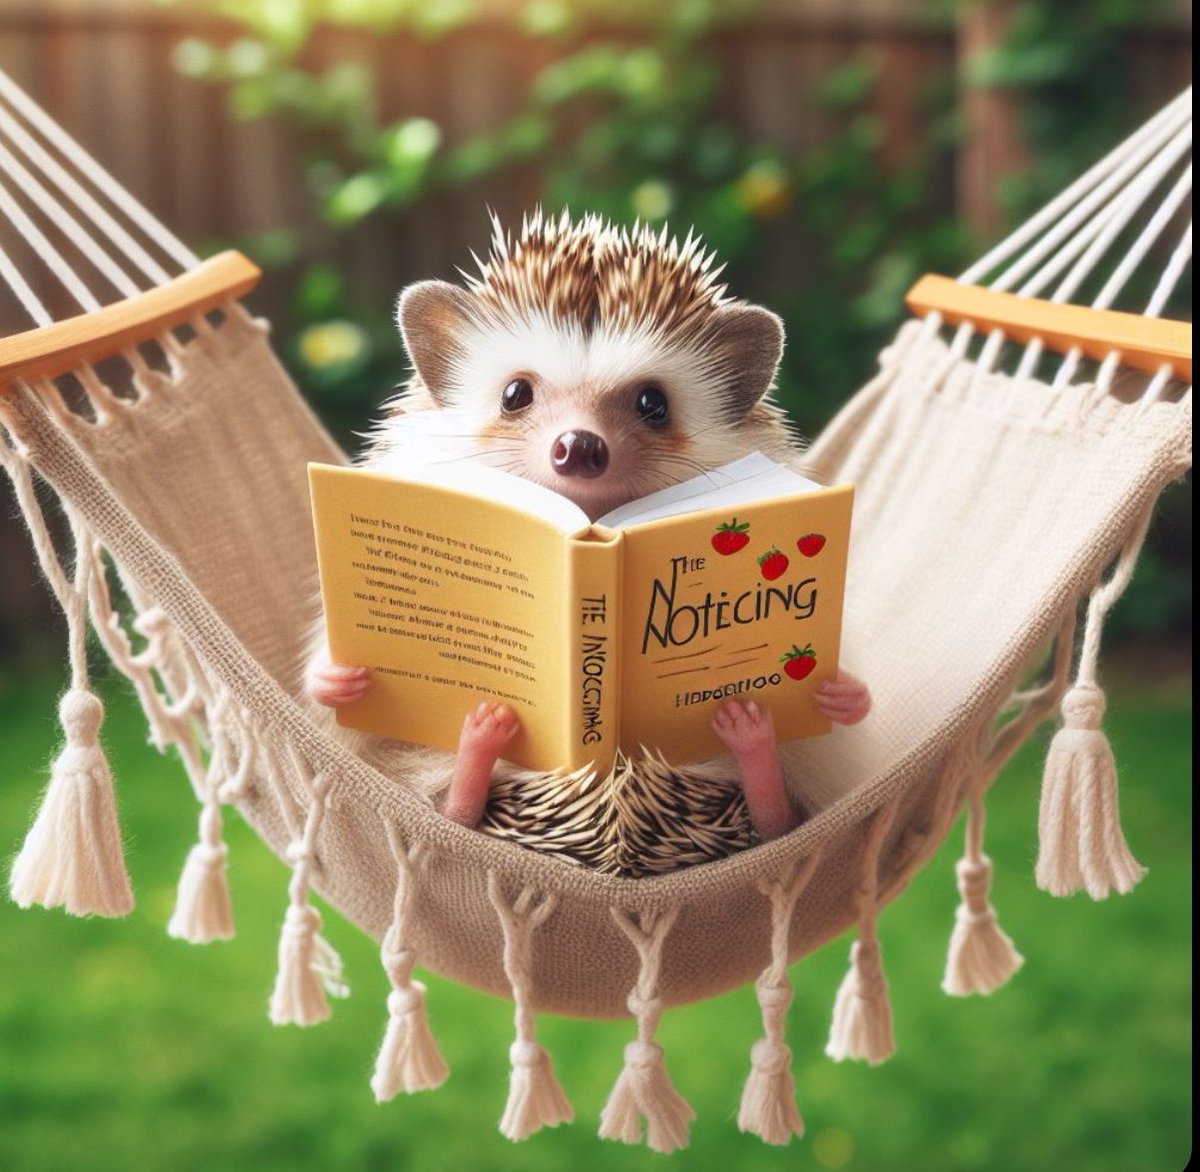 Hermann picked up great book today! I can’t get him to come in!
The 
Noticing
Continues
#HappyHedgehog